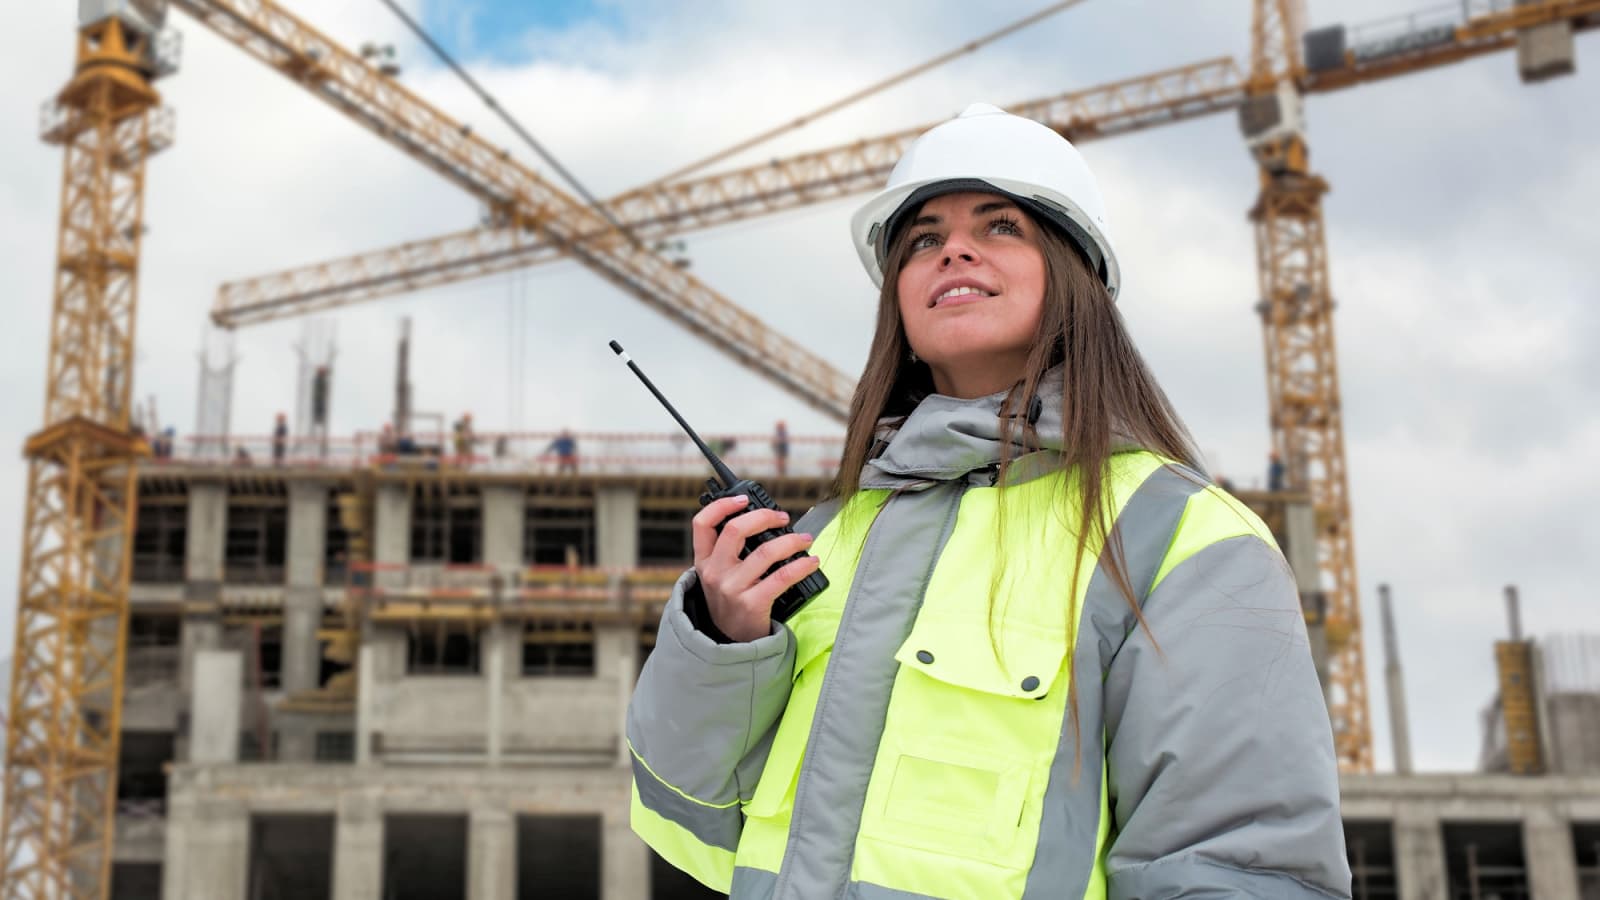 Women In Construction – Insights and Hiring Tips